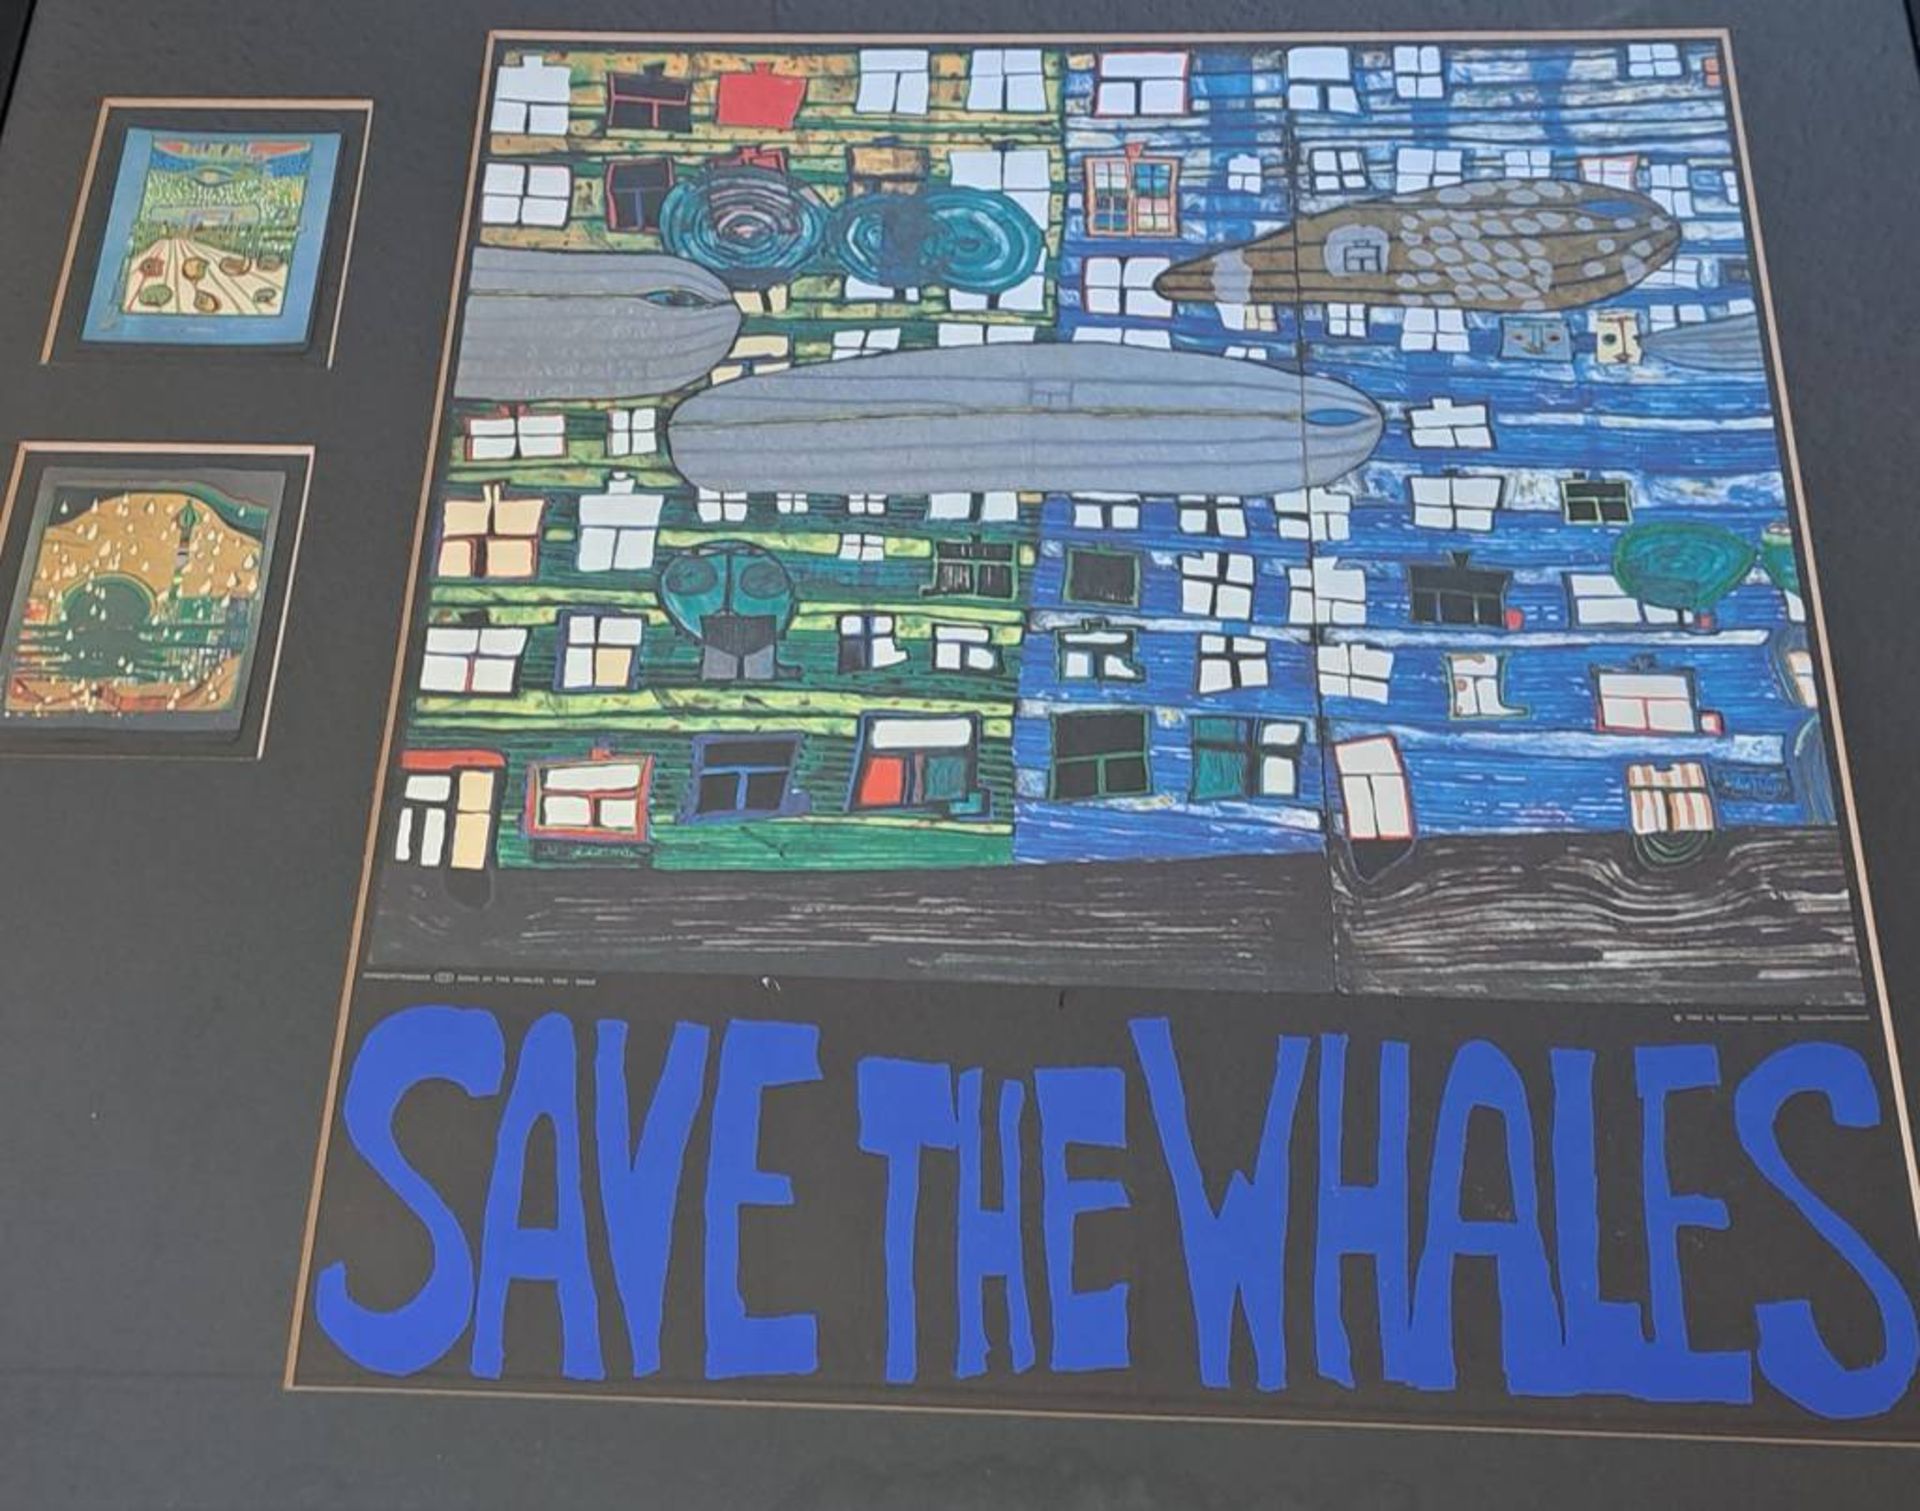 Hundertwasser "Save the Whales" - Image 6 of 6